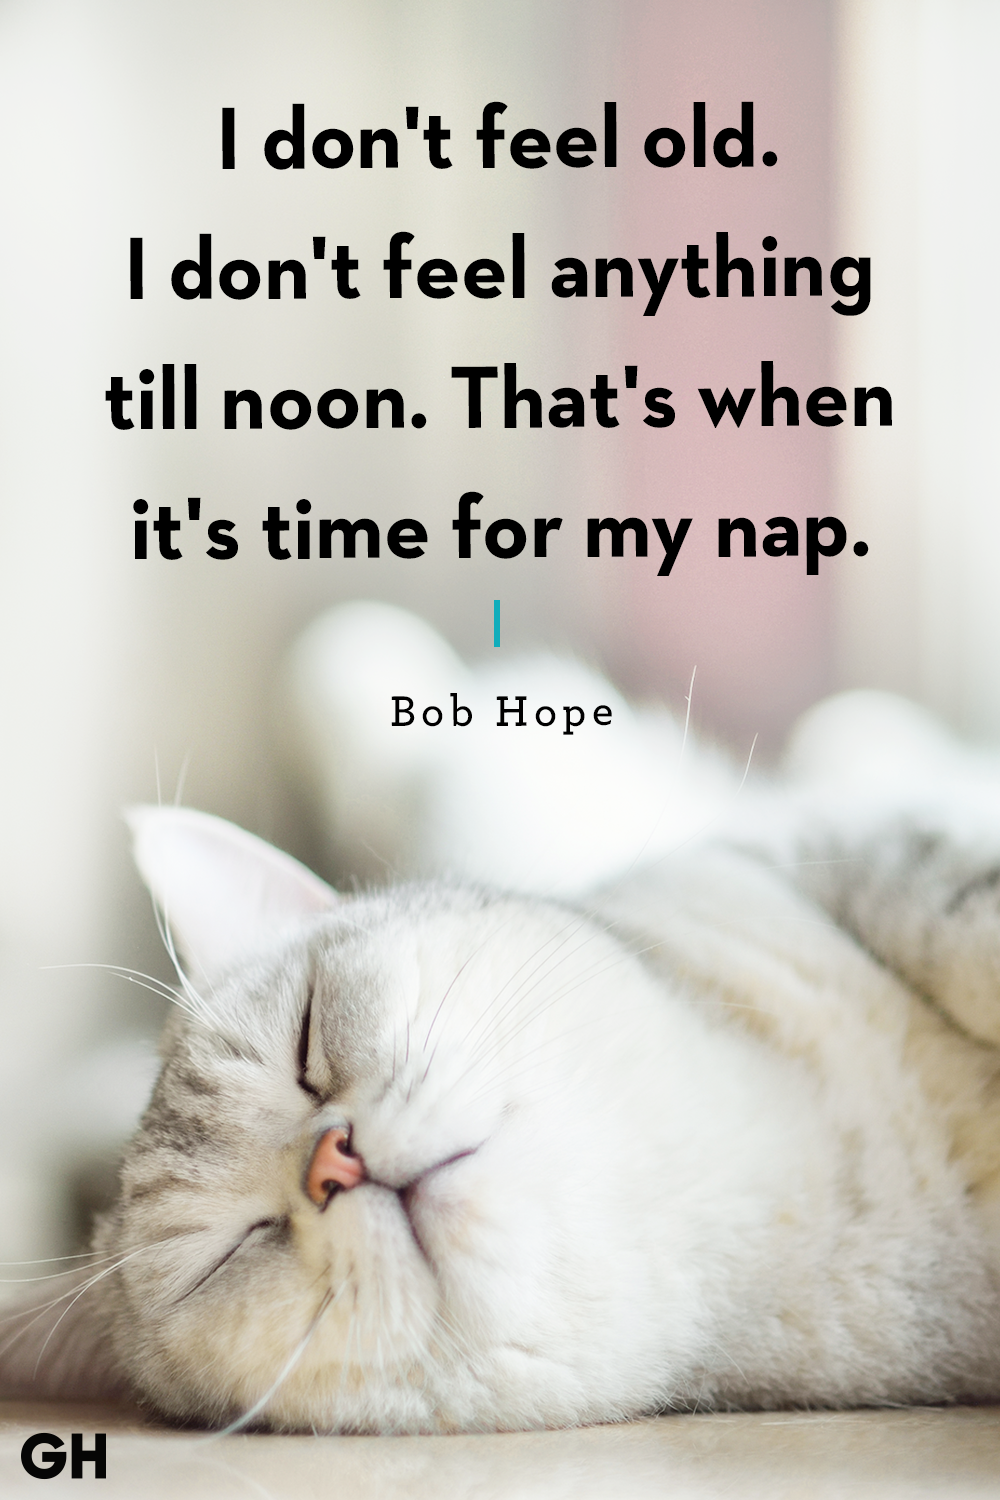 i don’t feel old. i don’t feel anything till noon. that’s when it’s time for my nap. bob hope